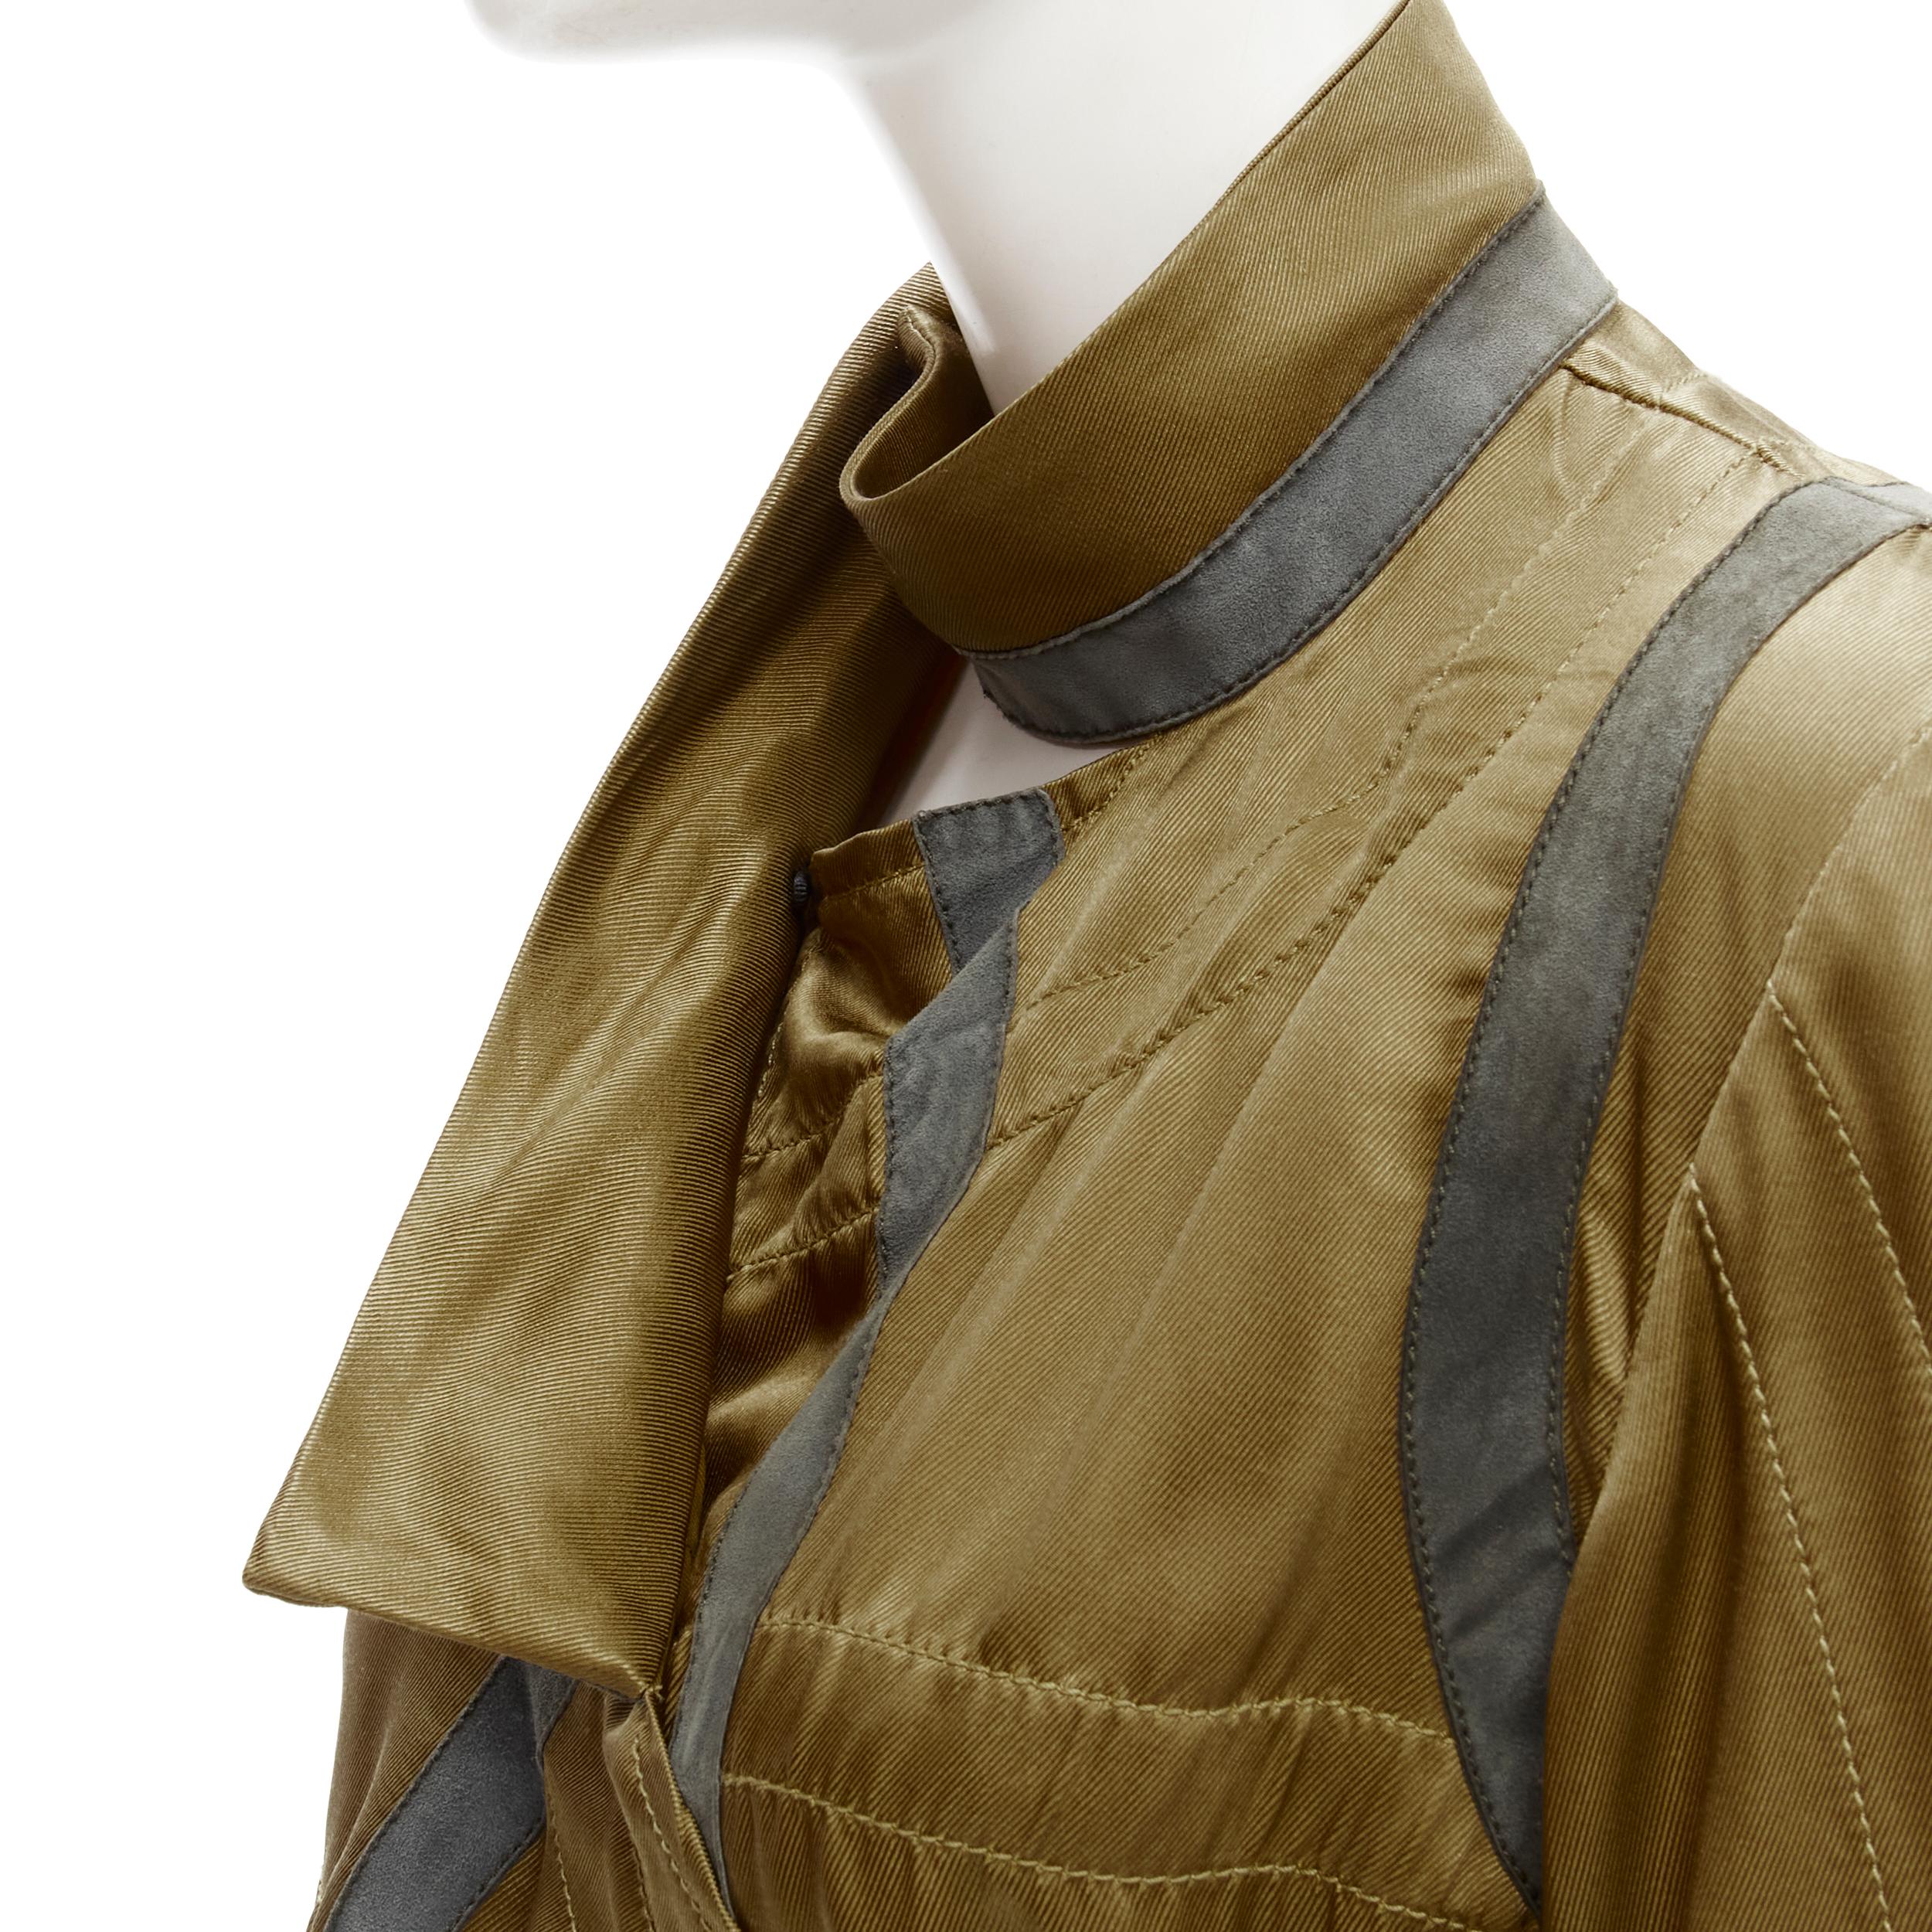 TOM FORD military green silk grey suede trim anorak jacket IT36 XS 
Reference: JACG/A00035 
Brand: Tom Ford 
Material: Silk 
Color: Green 
Pattern: Solid 
Closure: Zip 
Extra Detail: Open front with tie strings. Khaki green silk-blend upper. Grey